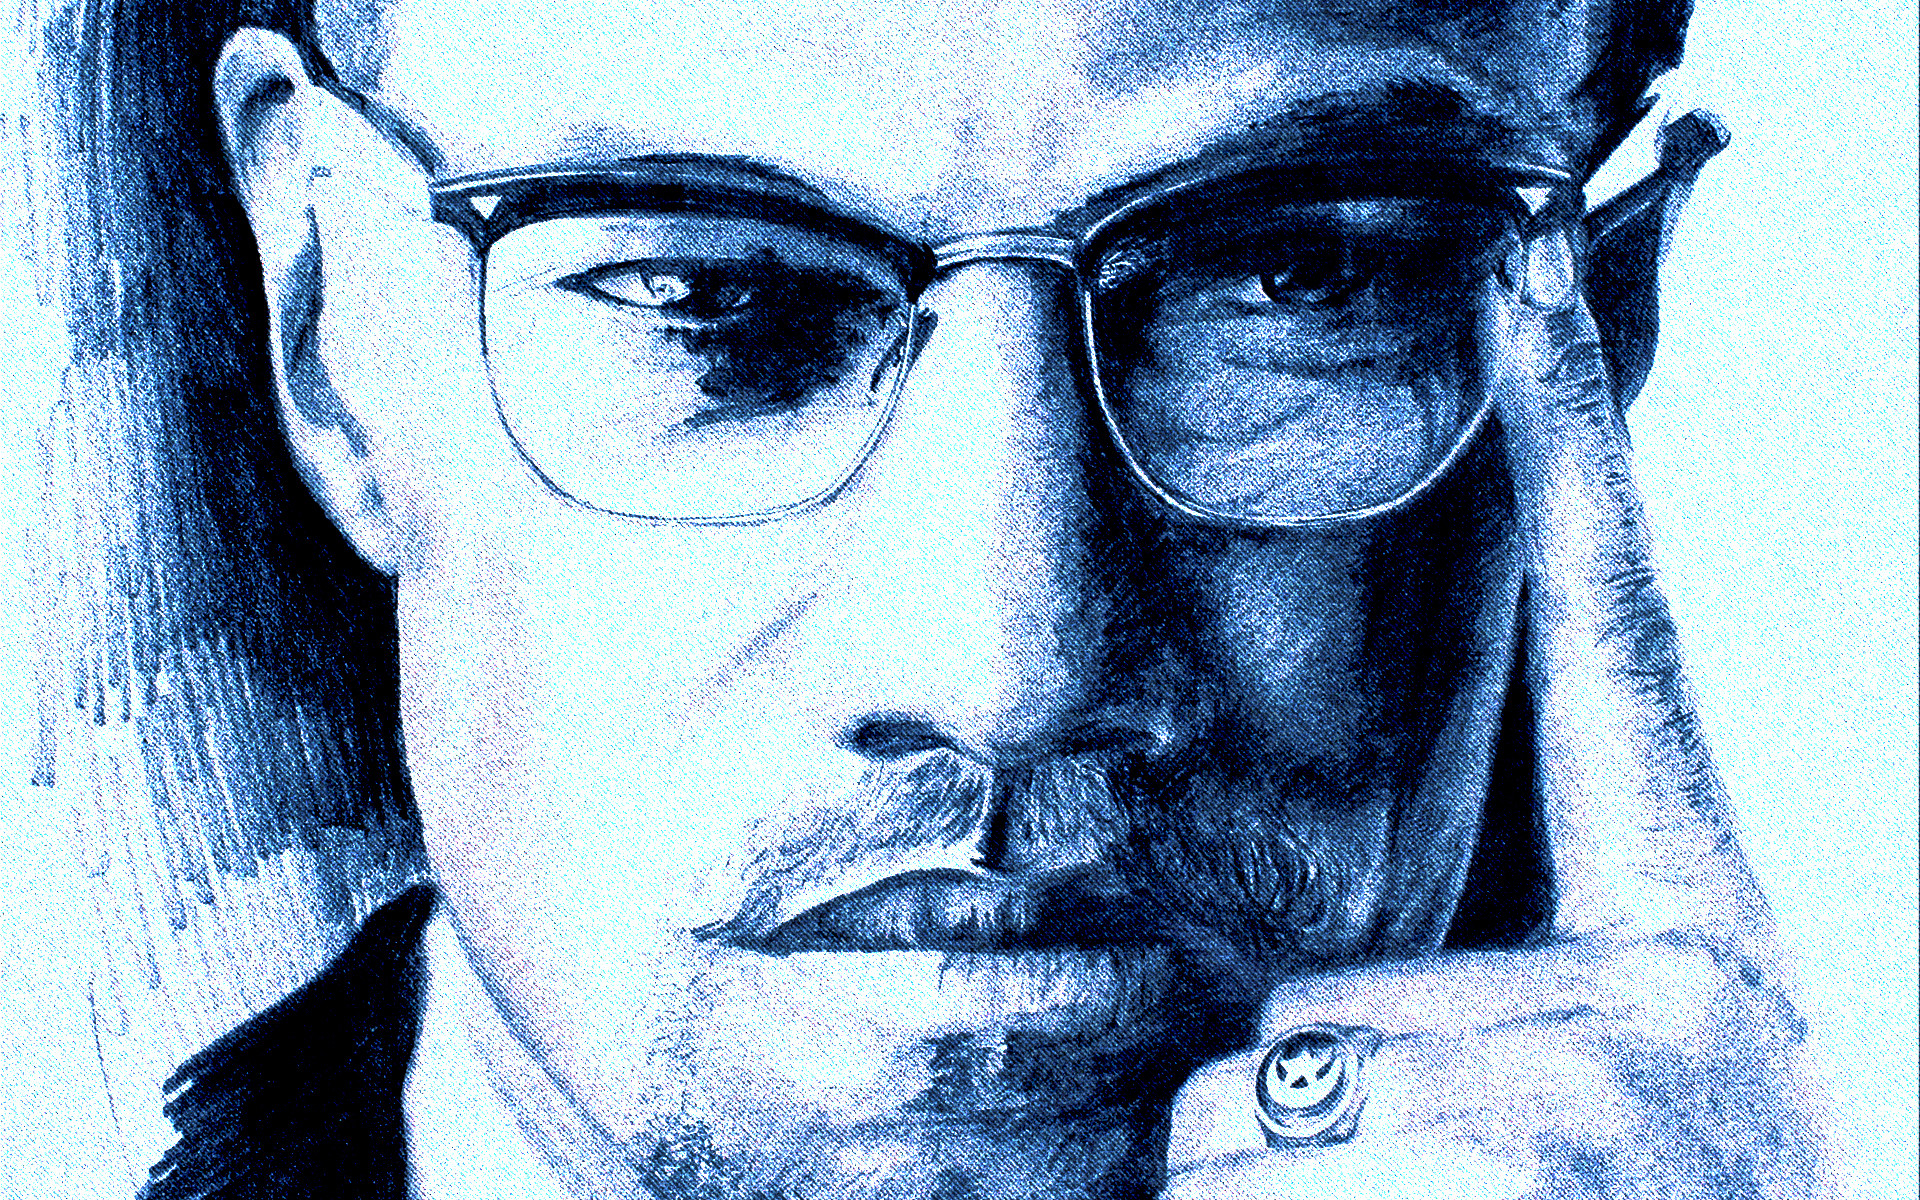 Malcolm X Wallpaper 71 images